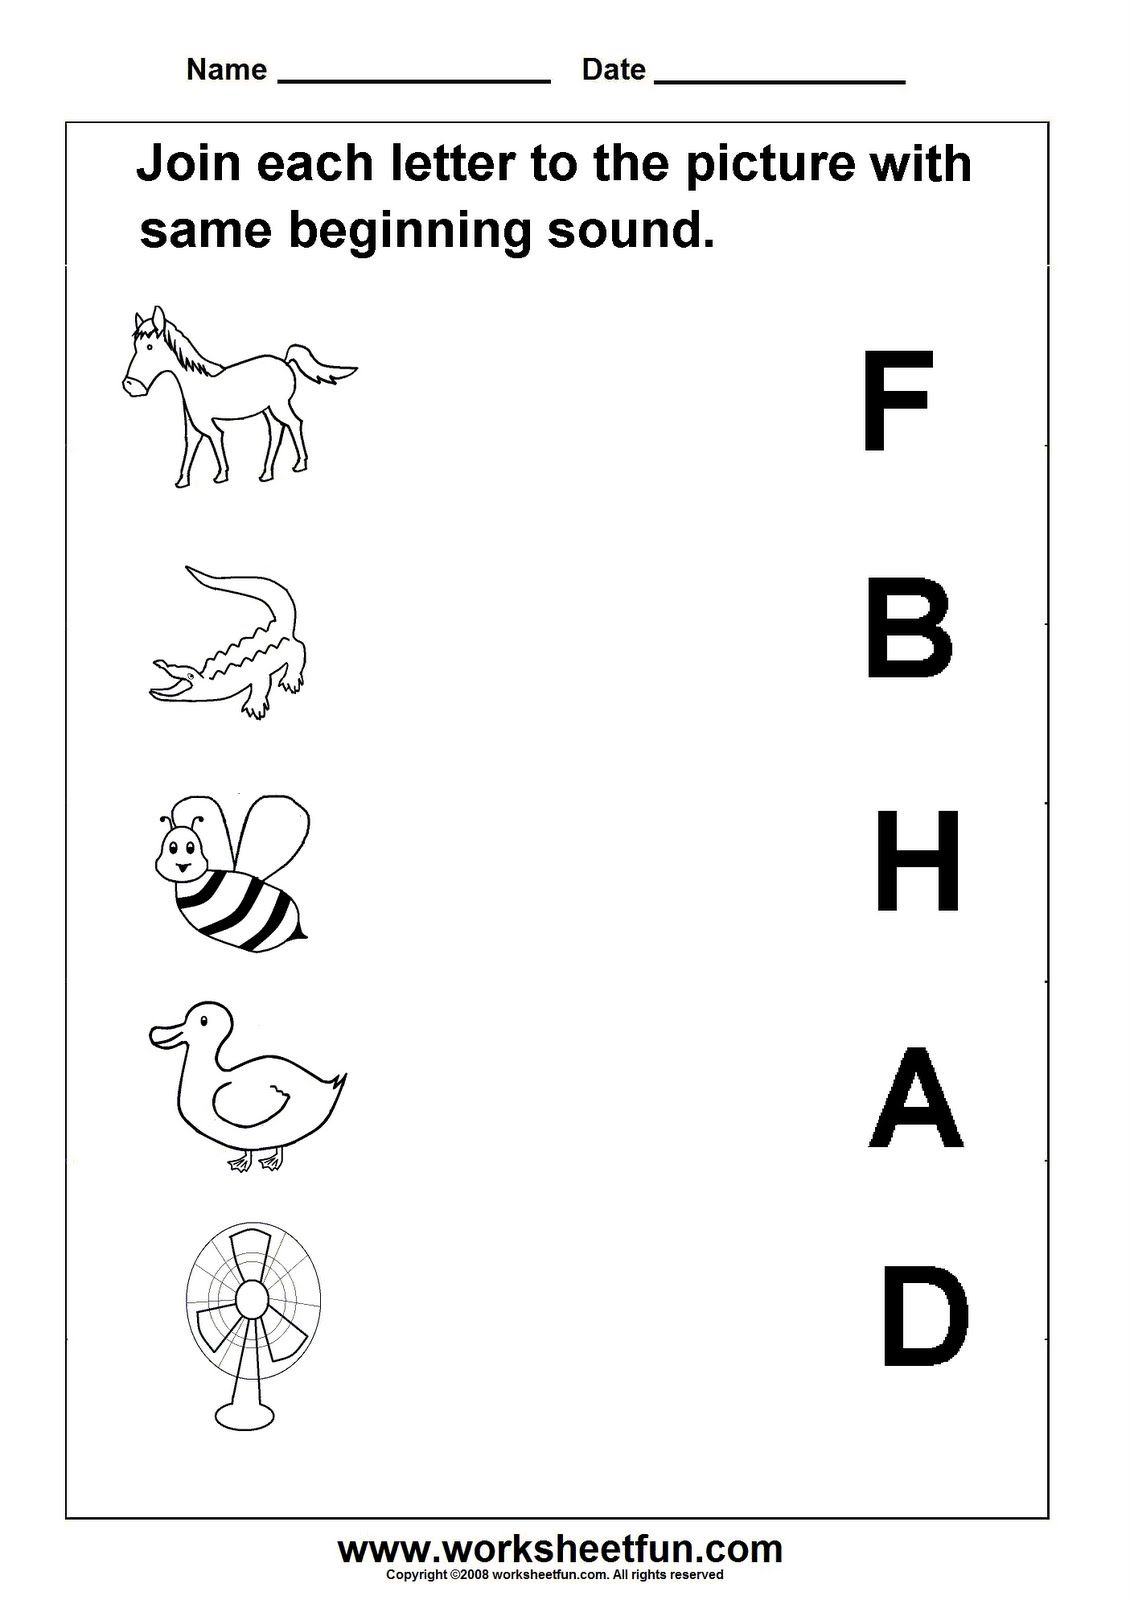 Initial Letters Worksheets | Beginning Sounds Worksheets within Alphabet Sounds Worksheets